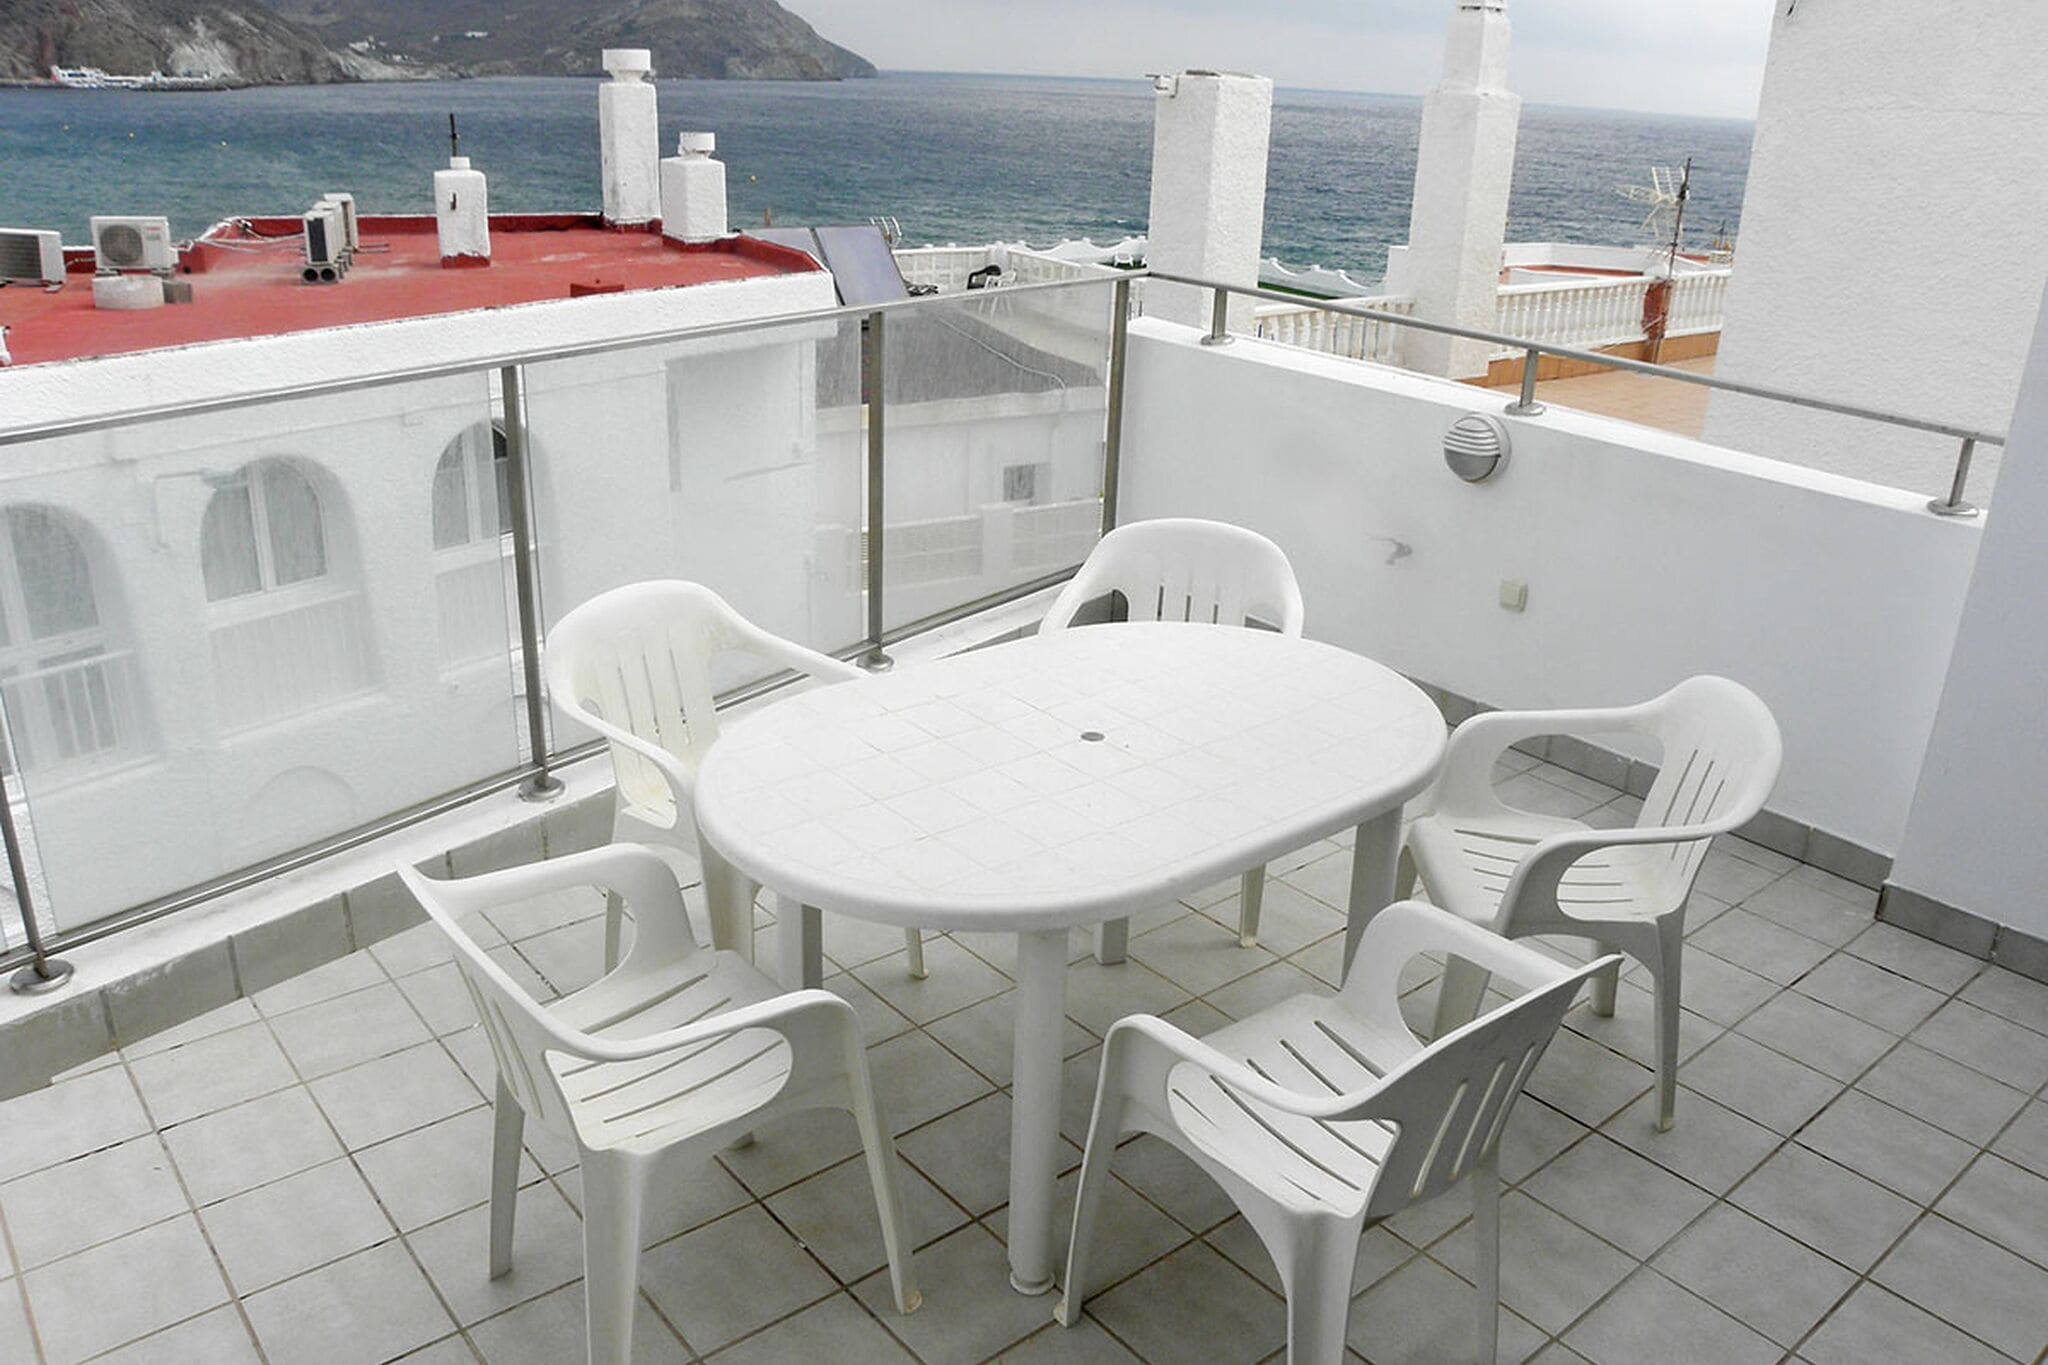 Attractive holiday home in Níjar near the sea